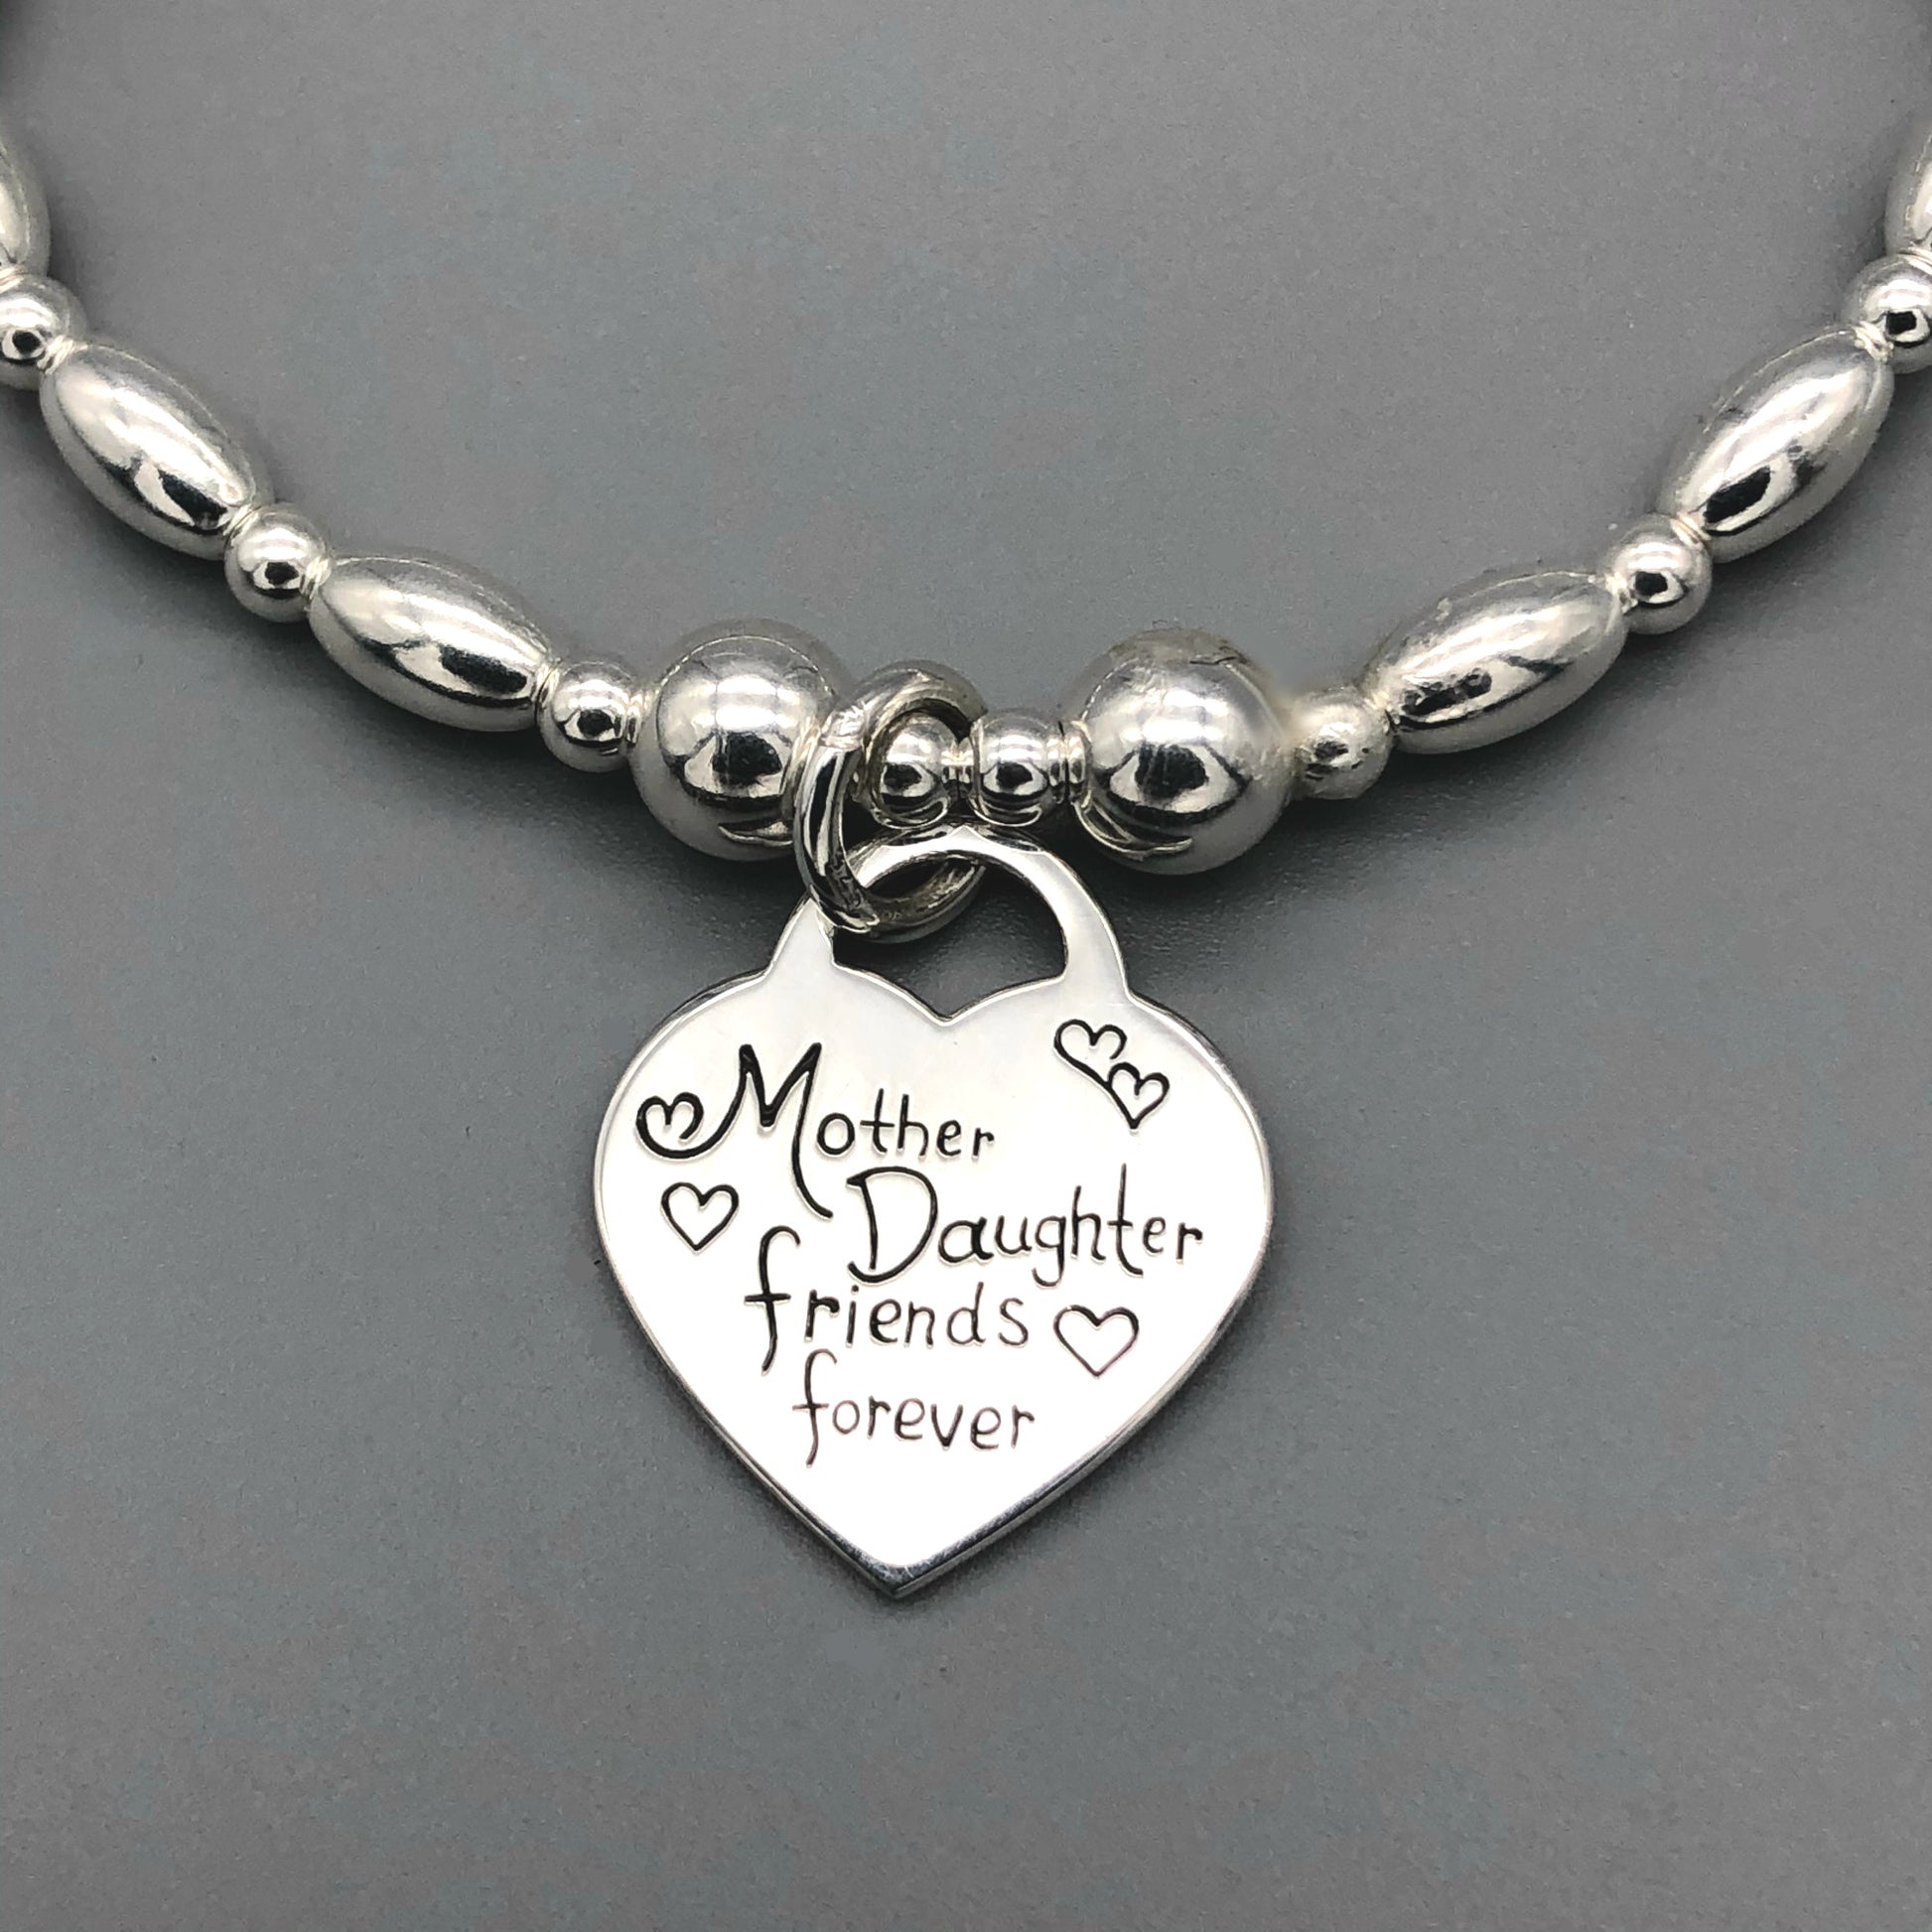 Closeup of "Mother Daughter Friends Forever" charm women's hand-made sterling silver charm bracelet by My Silver Wish